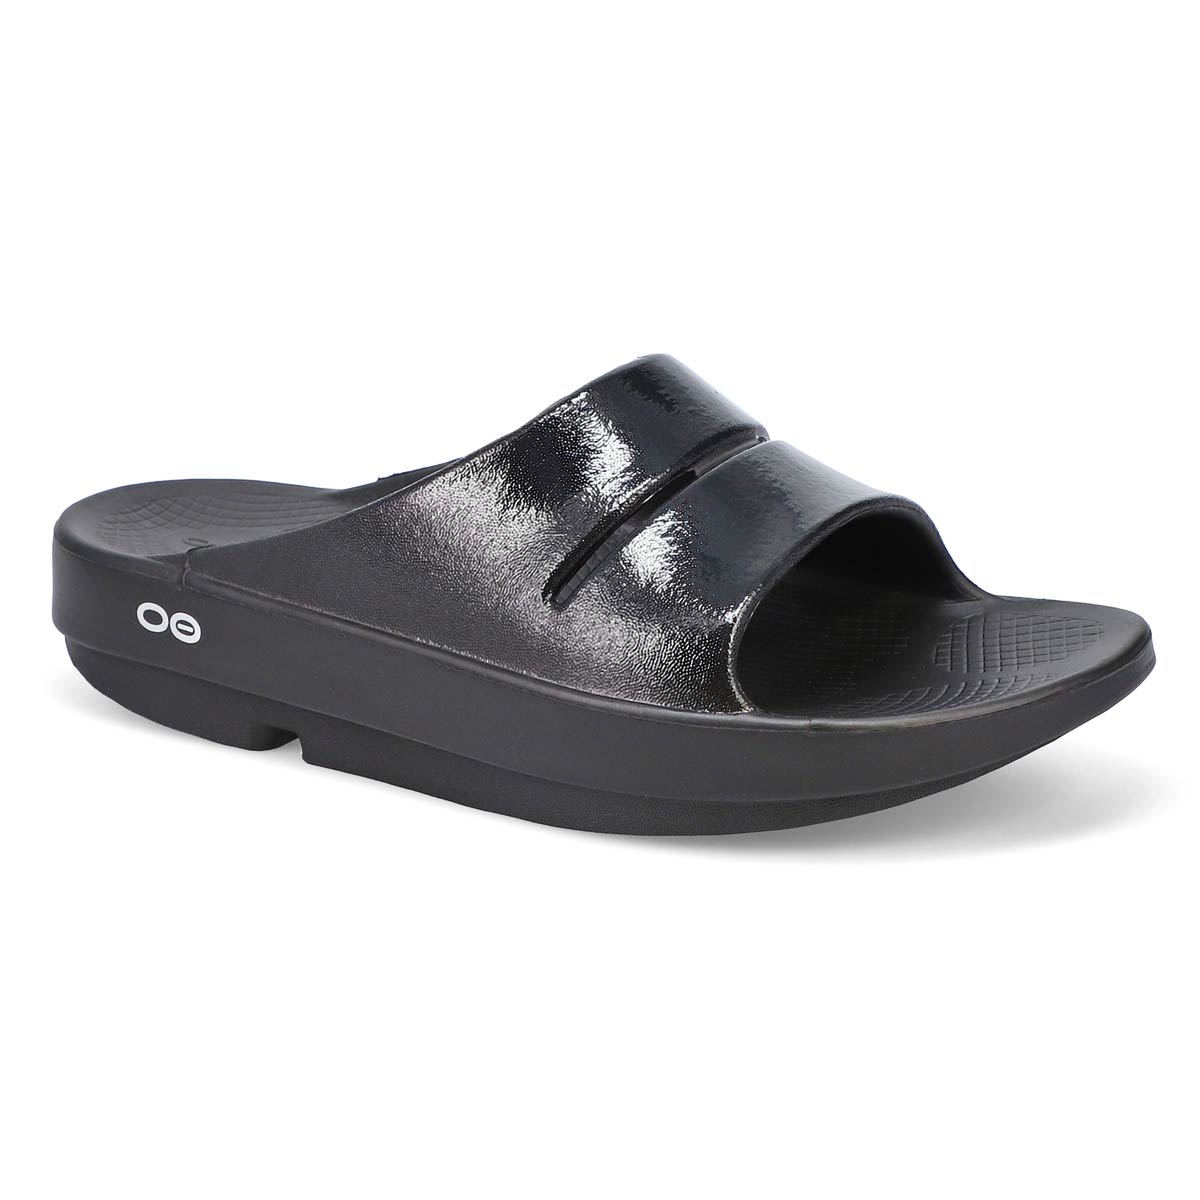 OOFOS Women's Ooahh Luxe Sandal - Black | SoftMoc.com